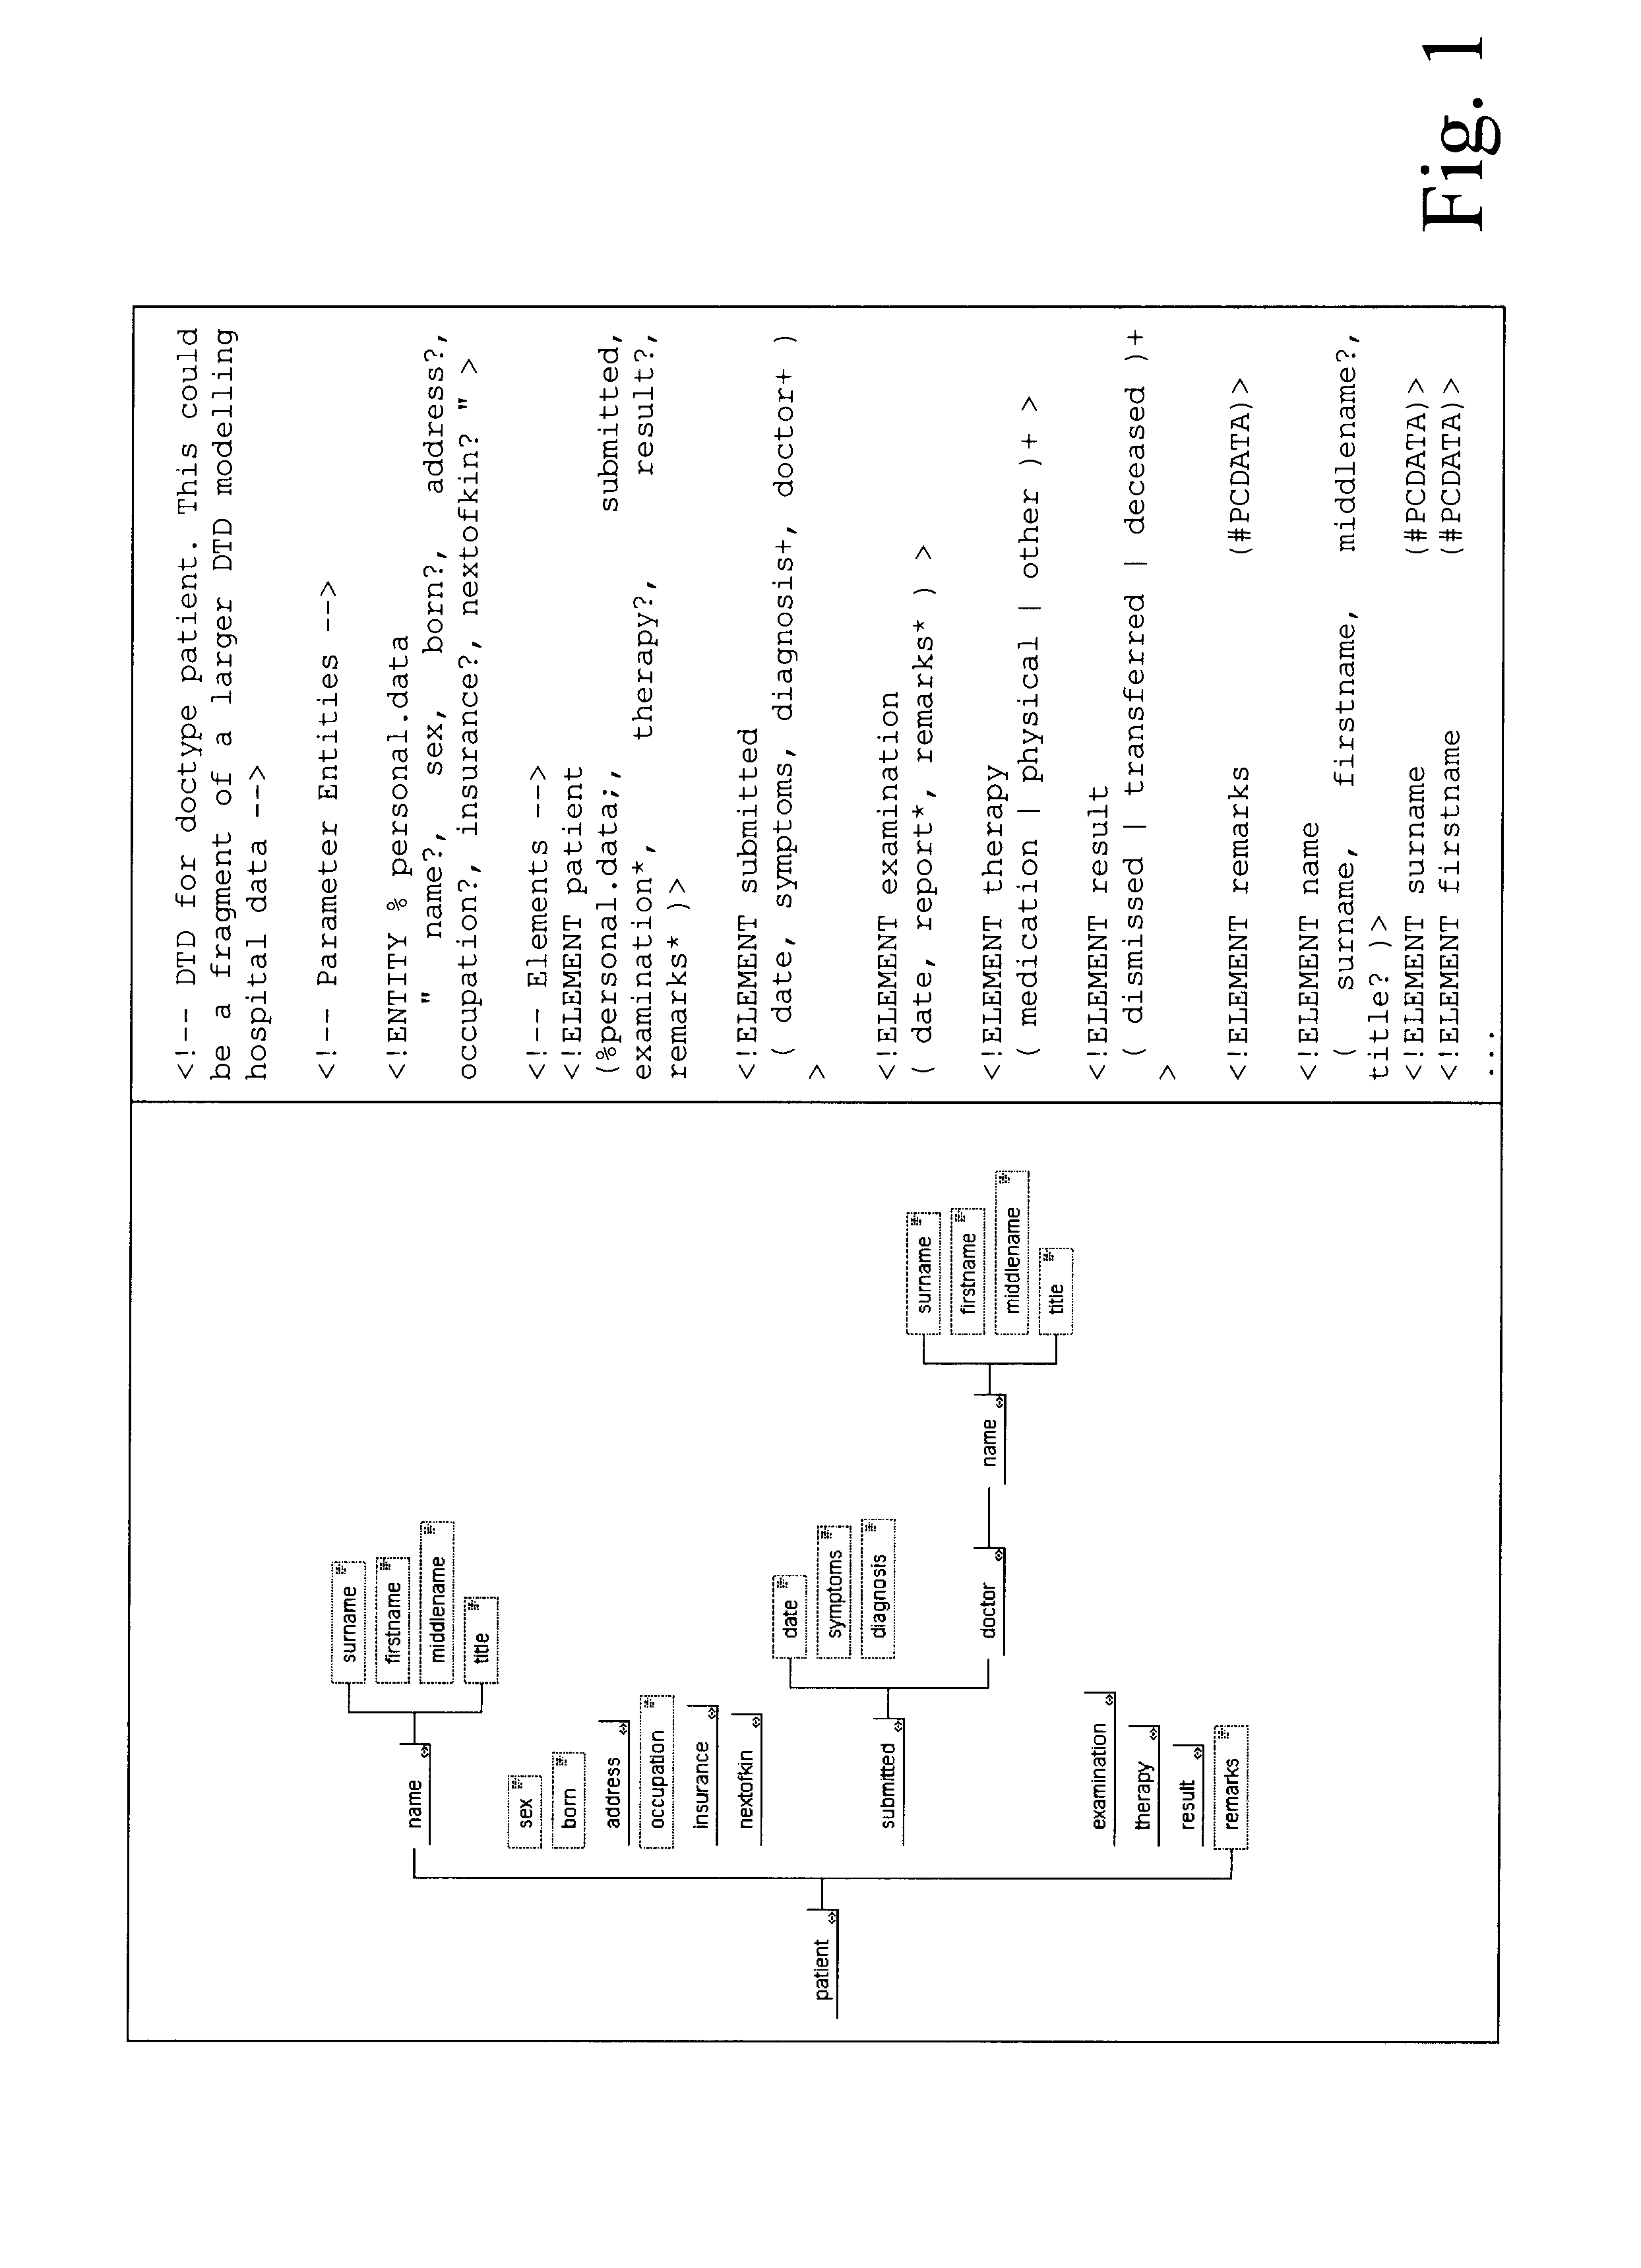 Method for storing and managing data